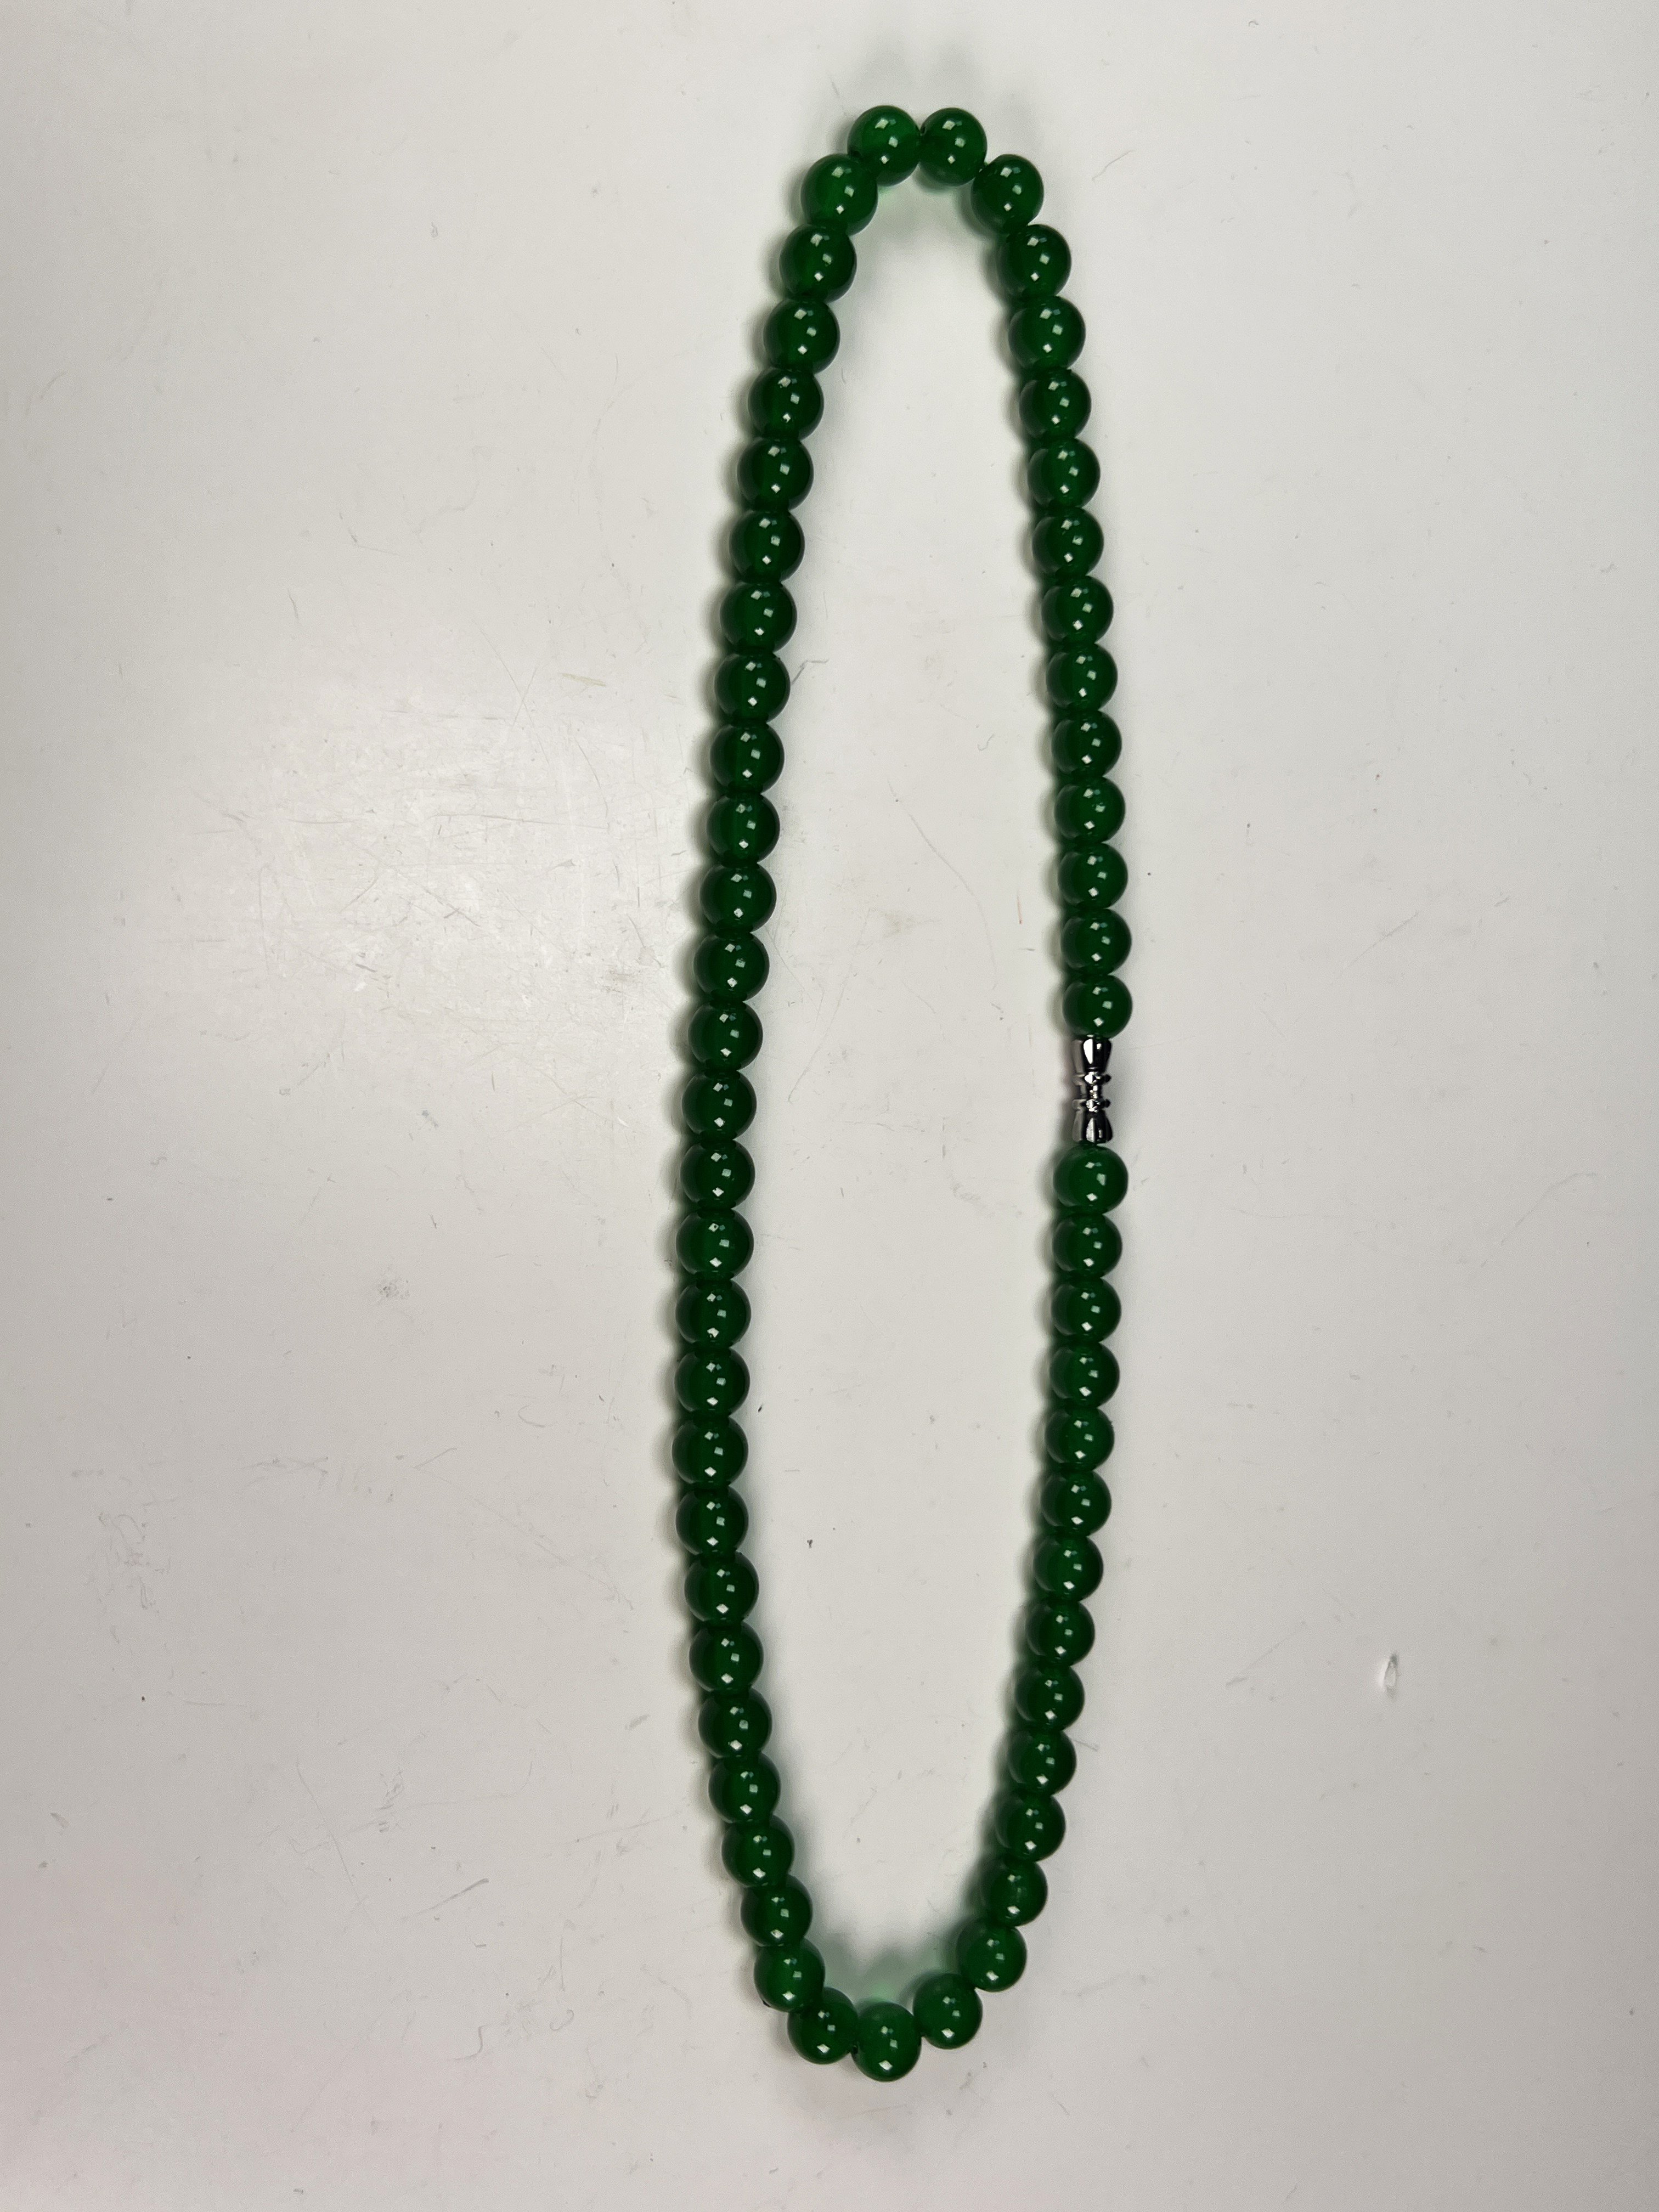 Lustrous Green Jade Bead Necklace - Timeless Elegance image 2